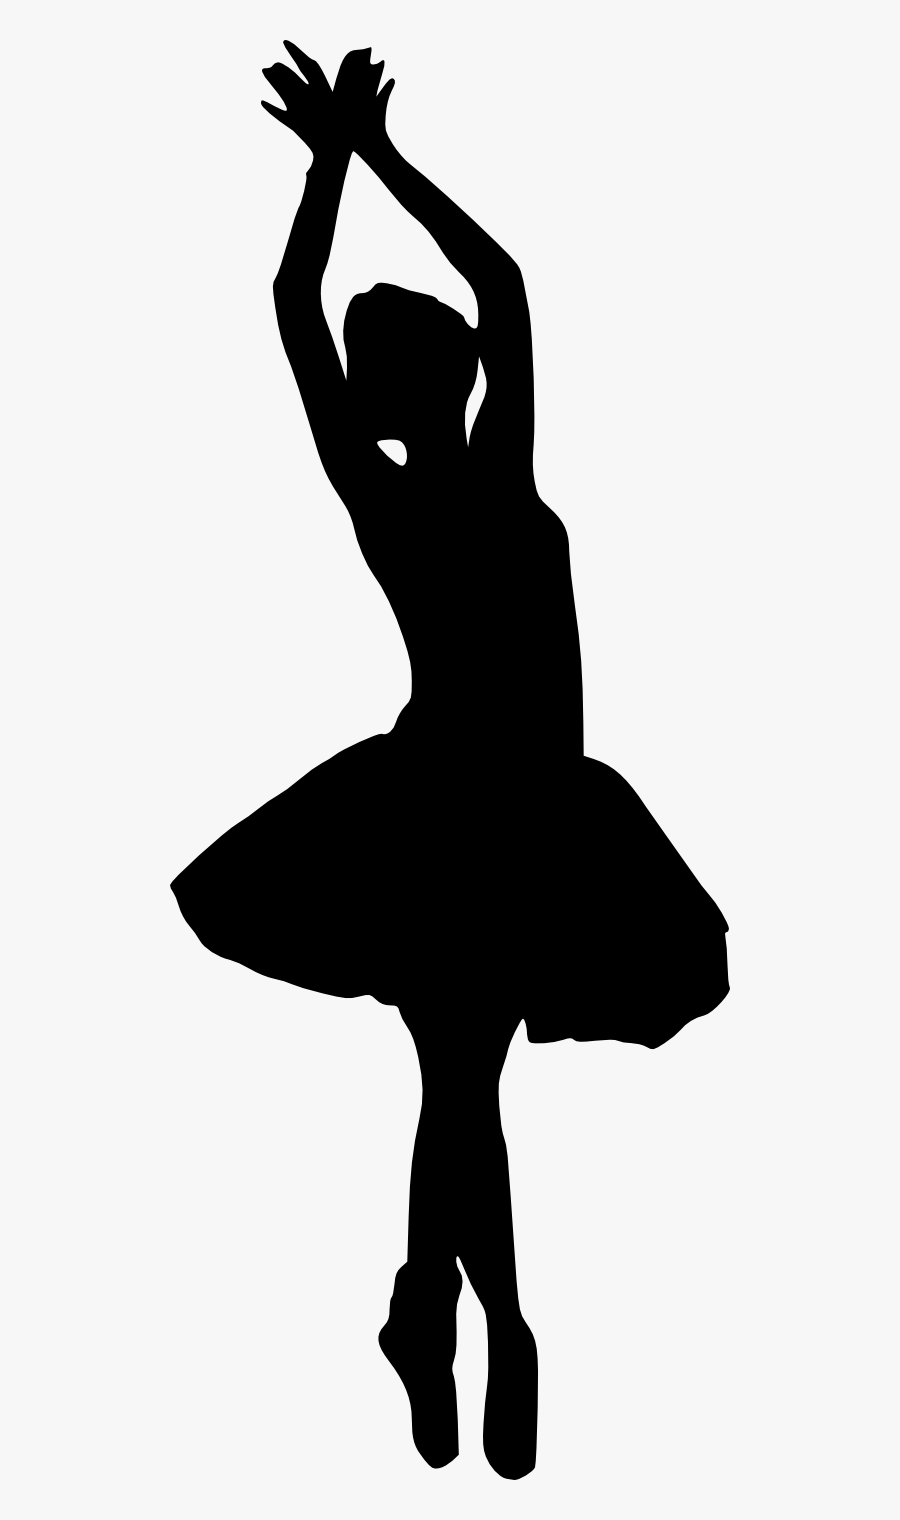 Ballerina Silhouette Png Download Image, Transparent Clipart